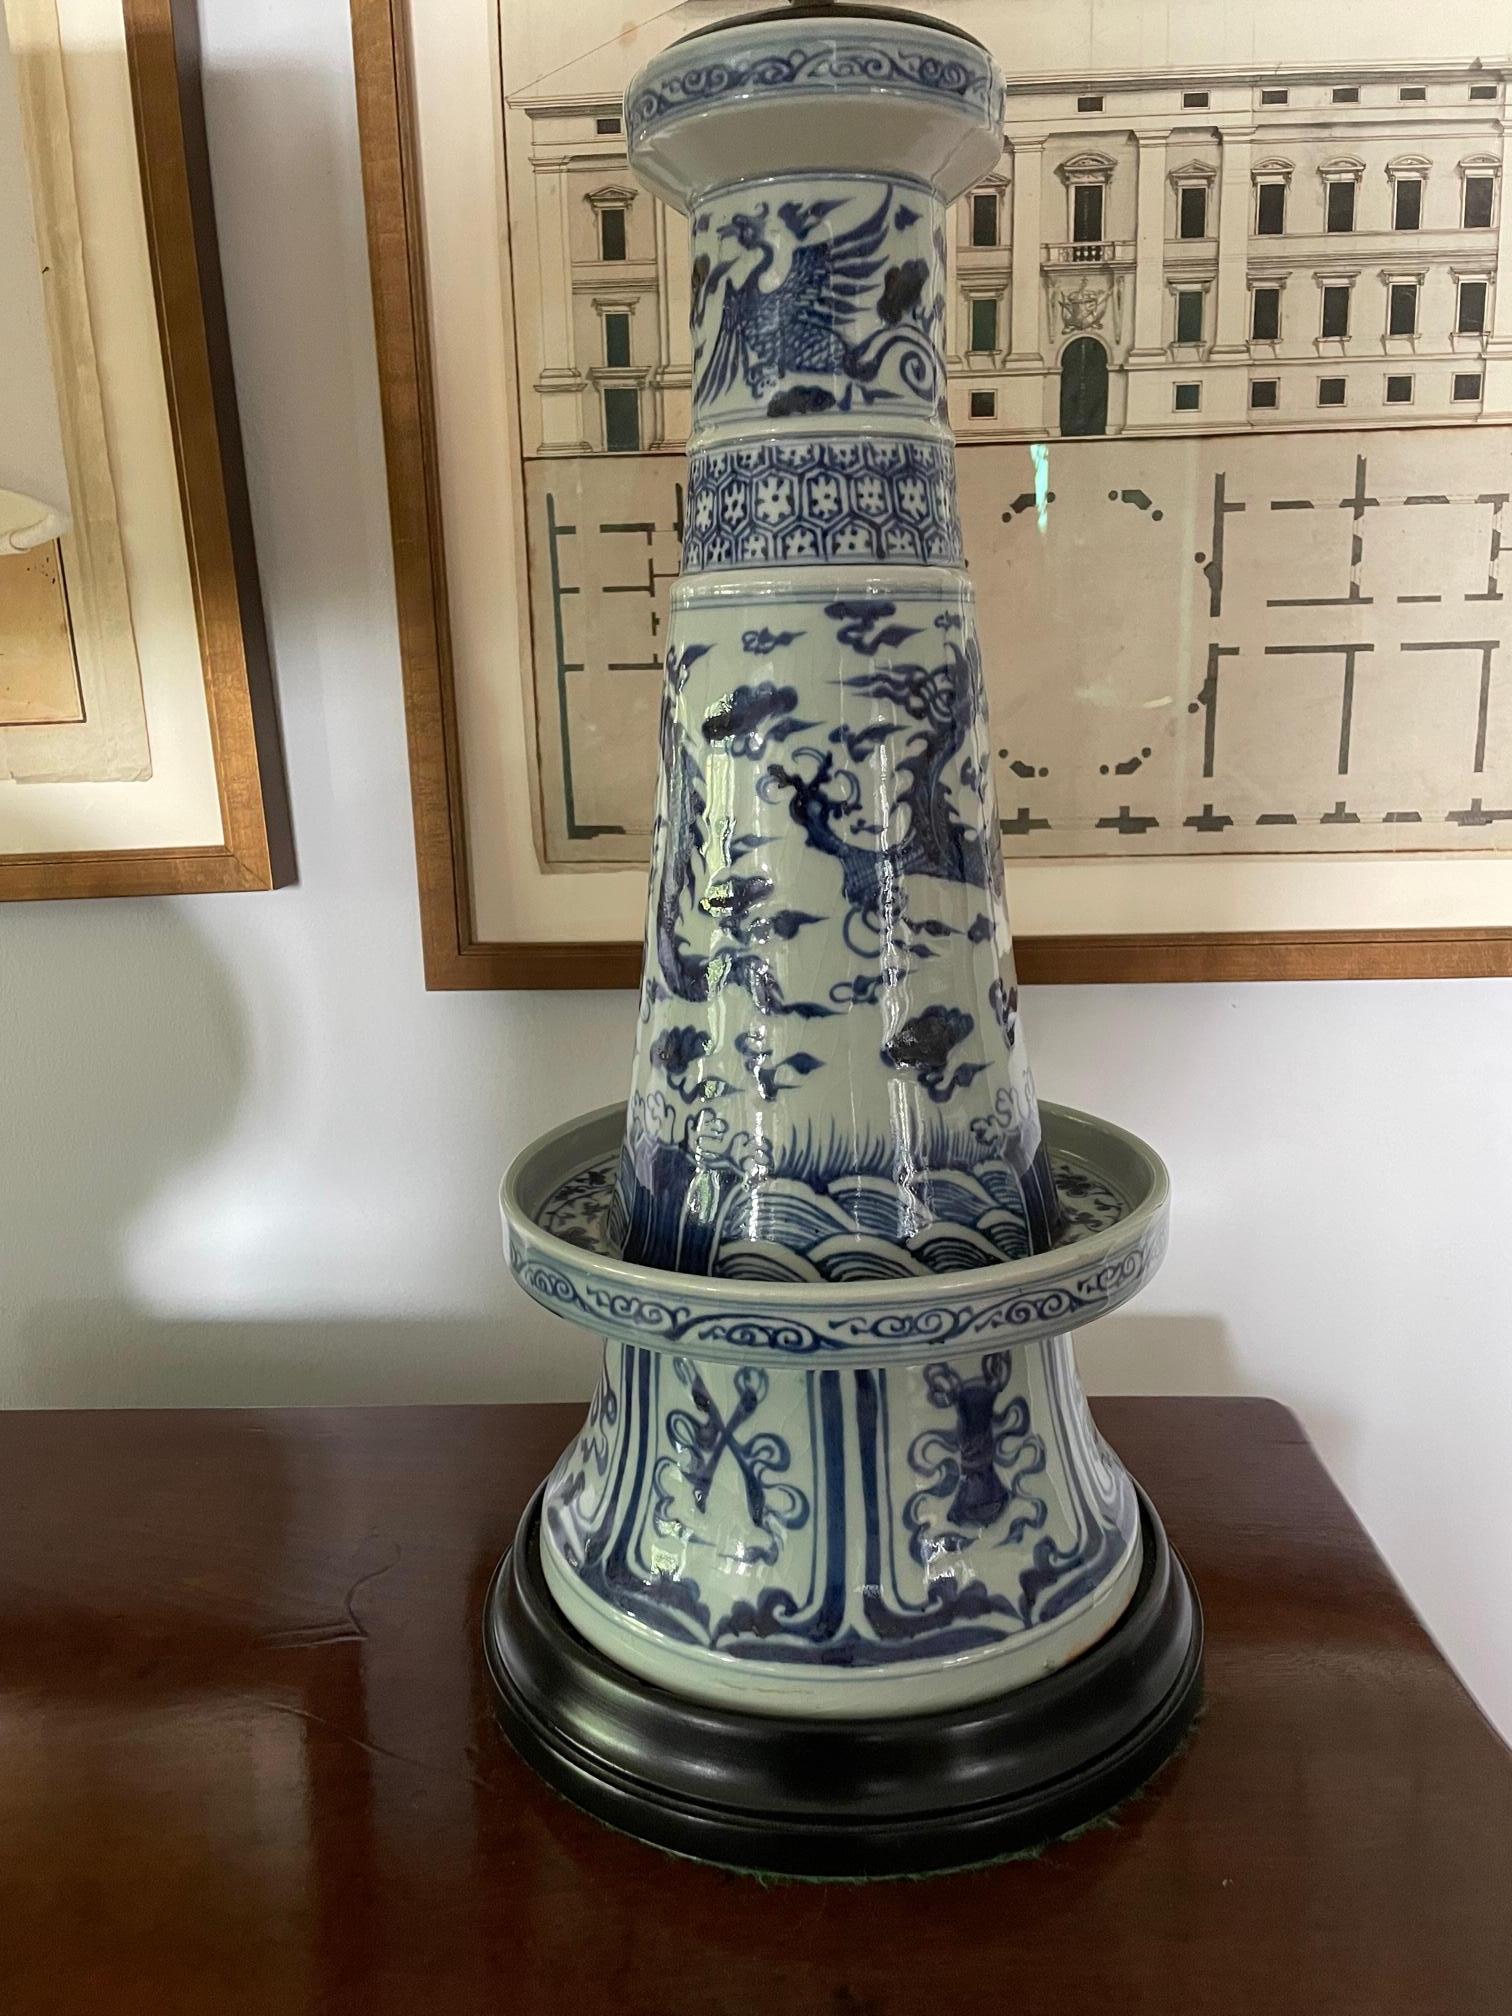 Unusual blue and white Chinese lamp in form of Incense Burner.
Measures: 9